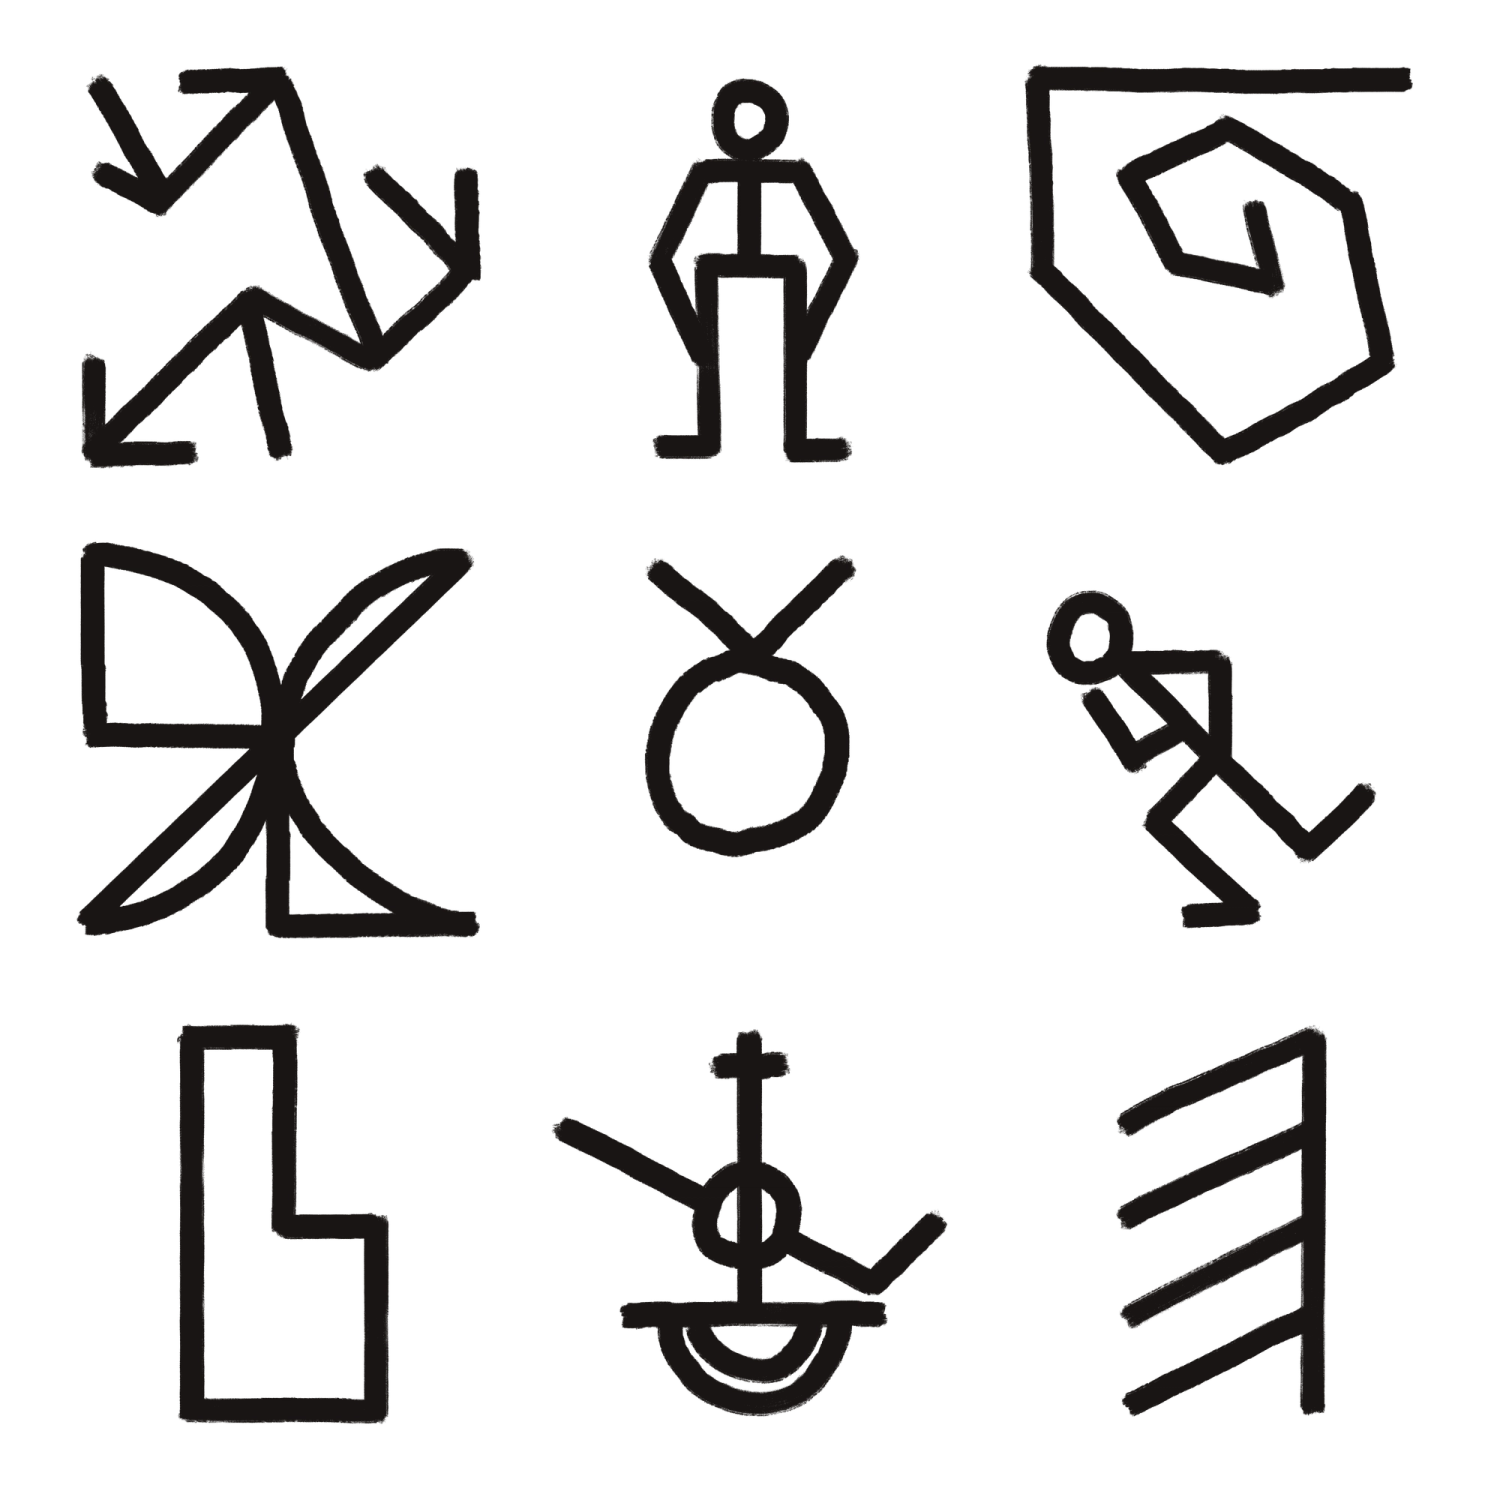 A collection of sigils and glyphs.